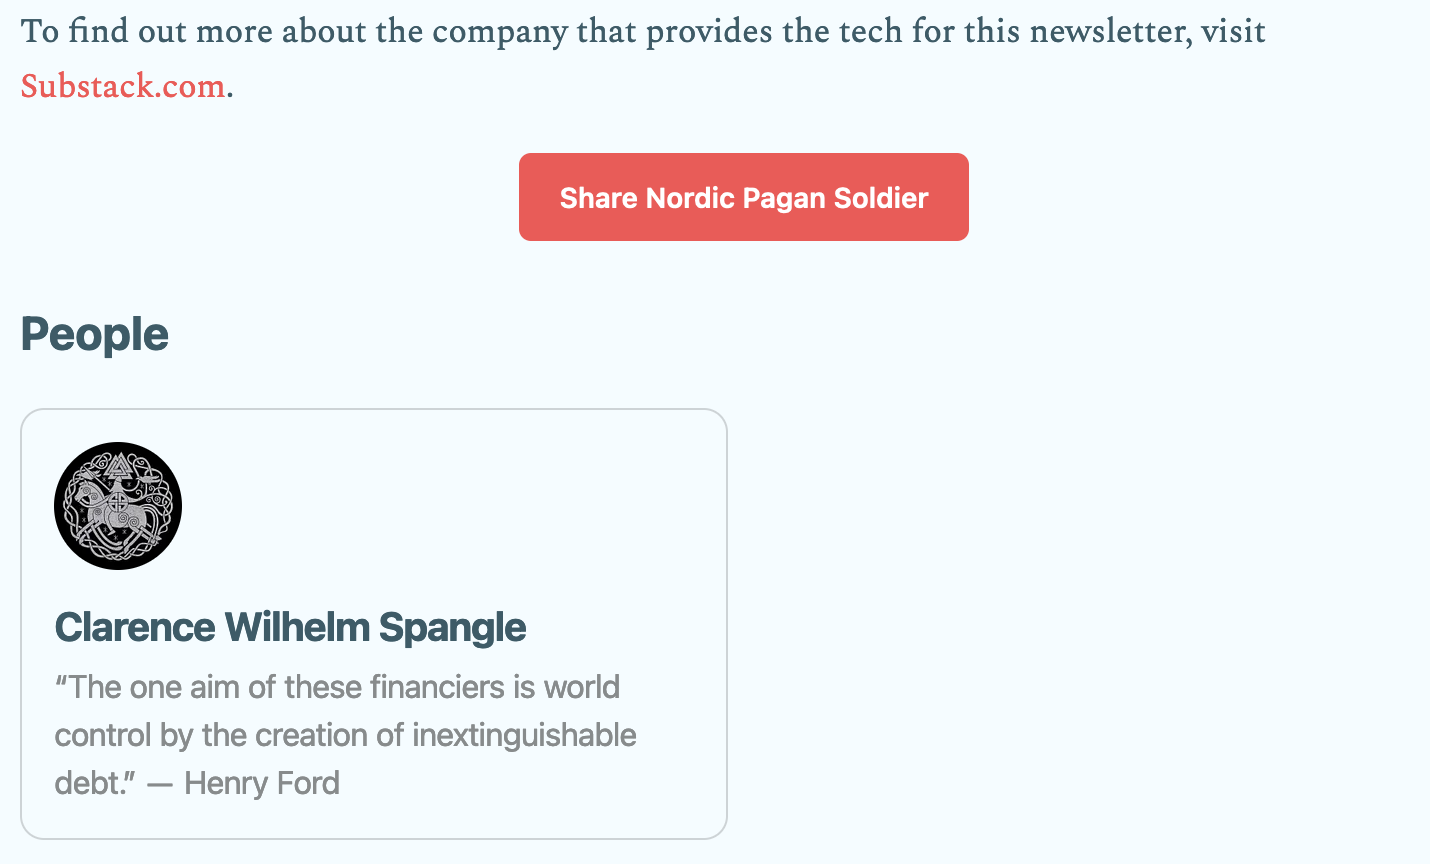 A screenshot of an About page that reads: To find out more about the company that provides the tech for this newsletter, visit Substack.com. Share Nordic Pagan Soldier People Clarence Wilhelm Spangle "The one aim of these financiers is world control by the creation of inextinguishable debt." - Henry Ford